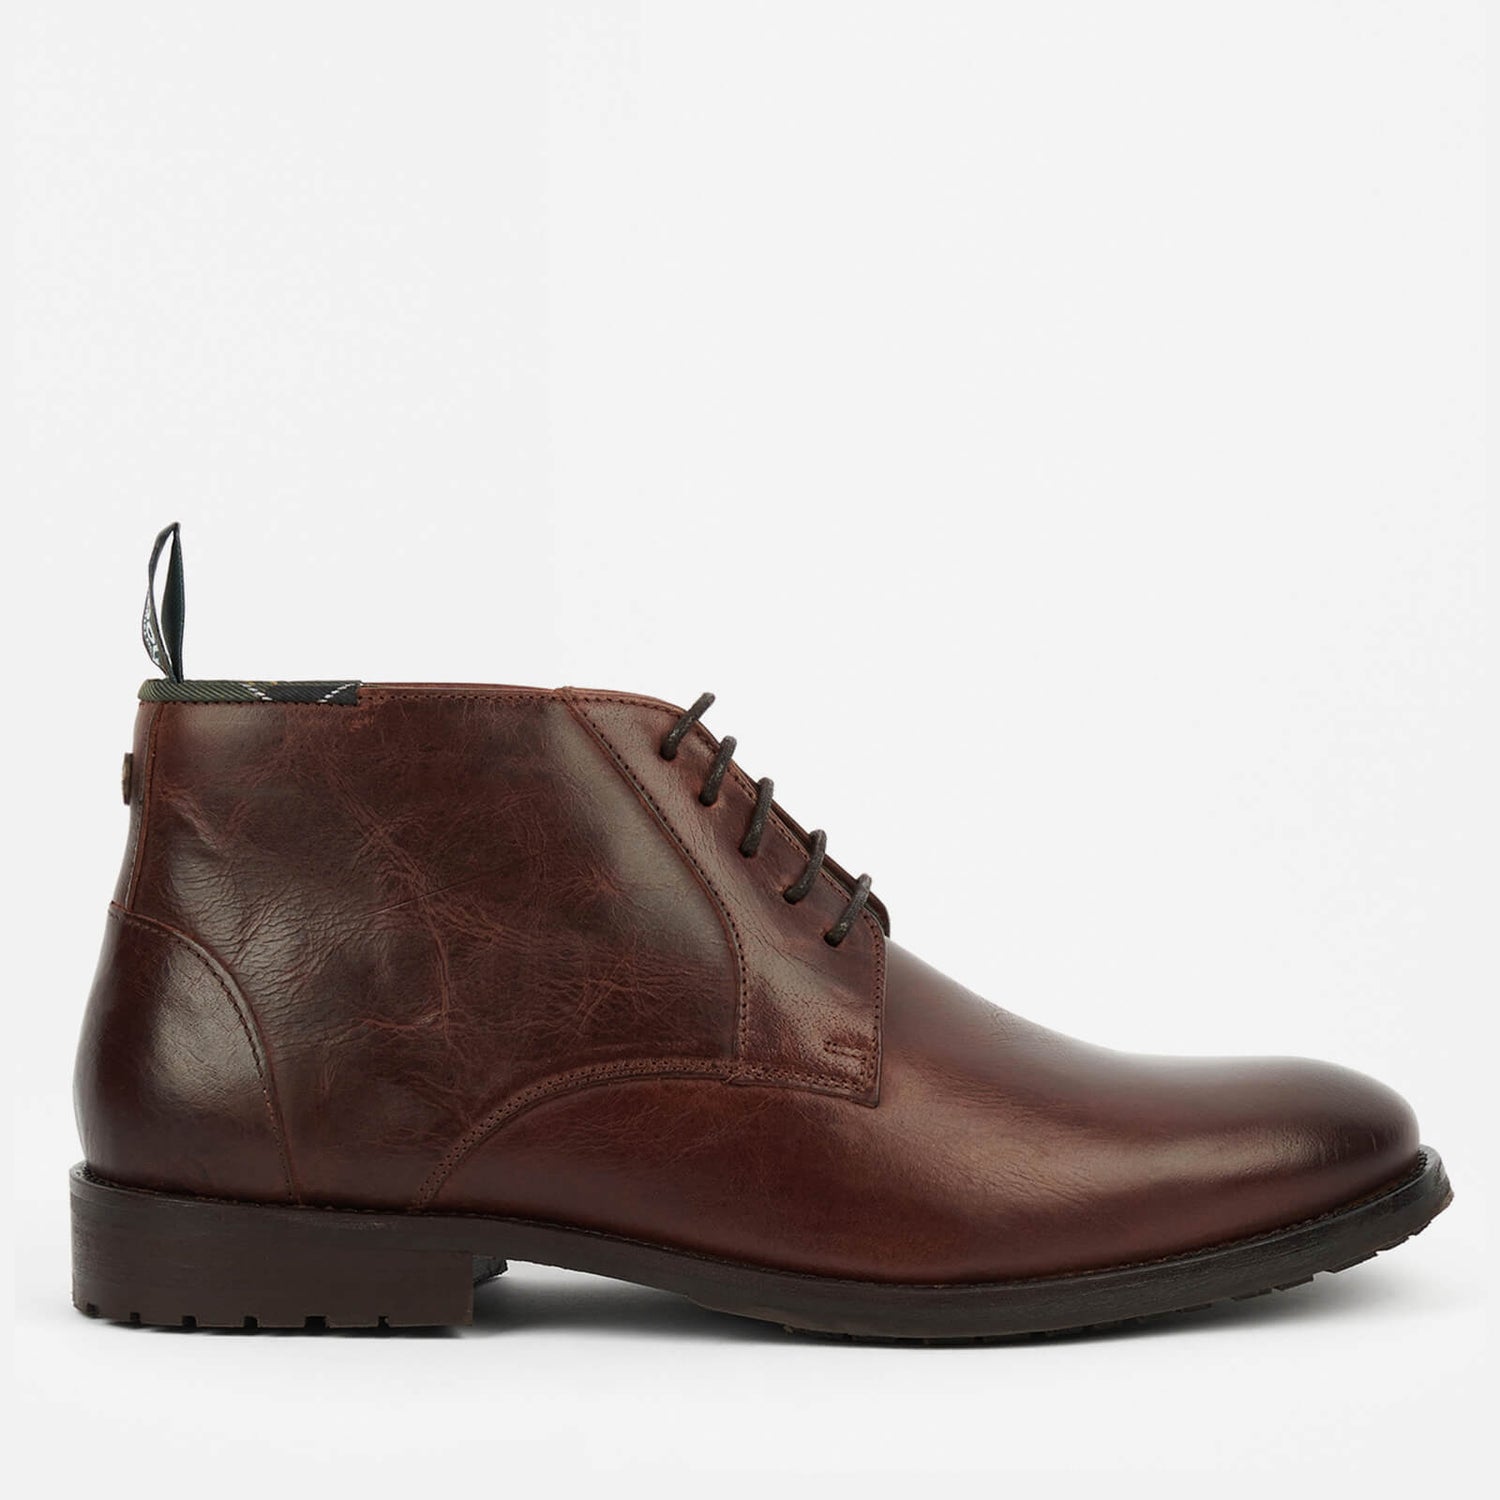 Barbour Irchester Leather Desert Boots - UK 8